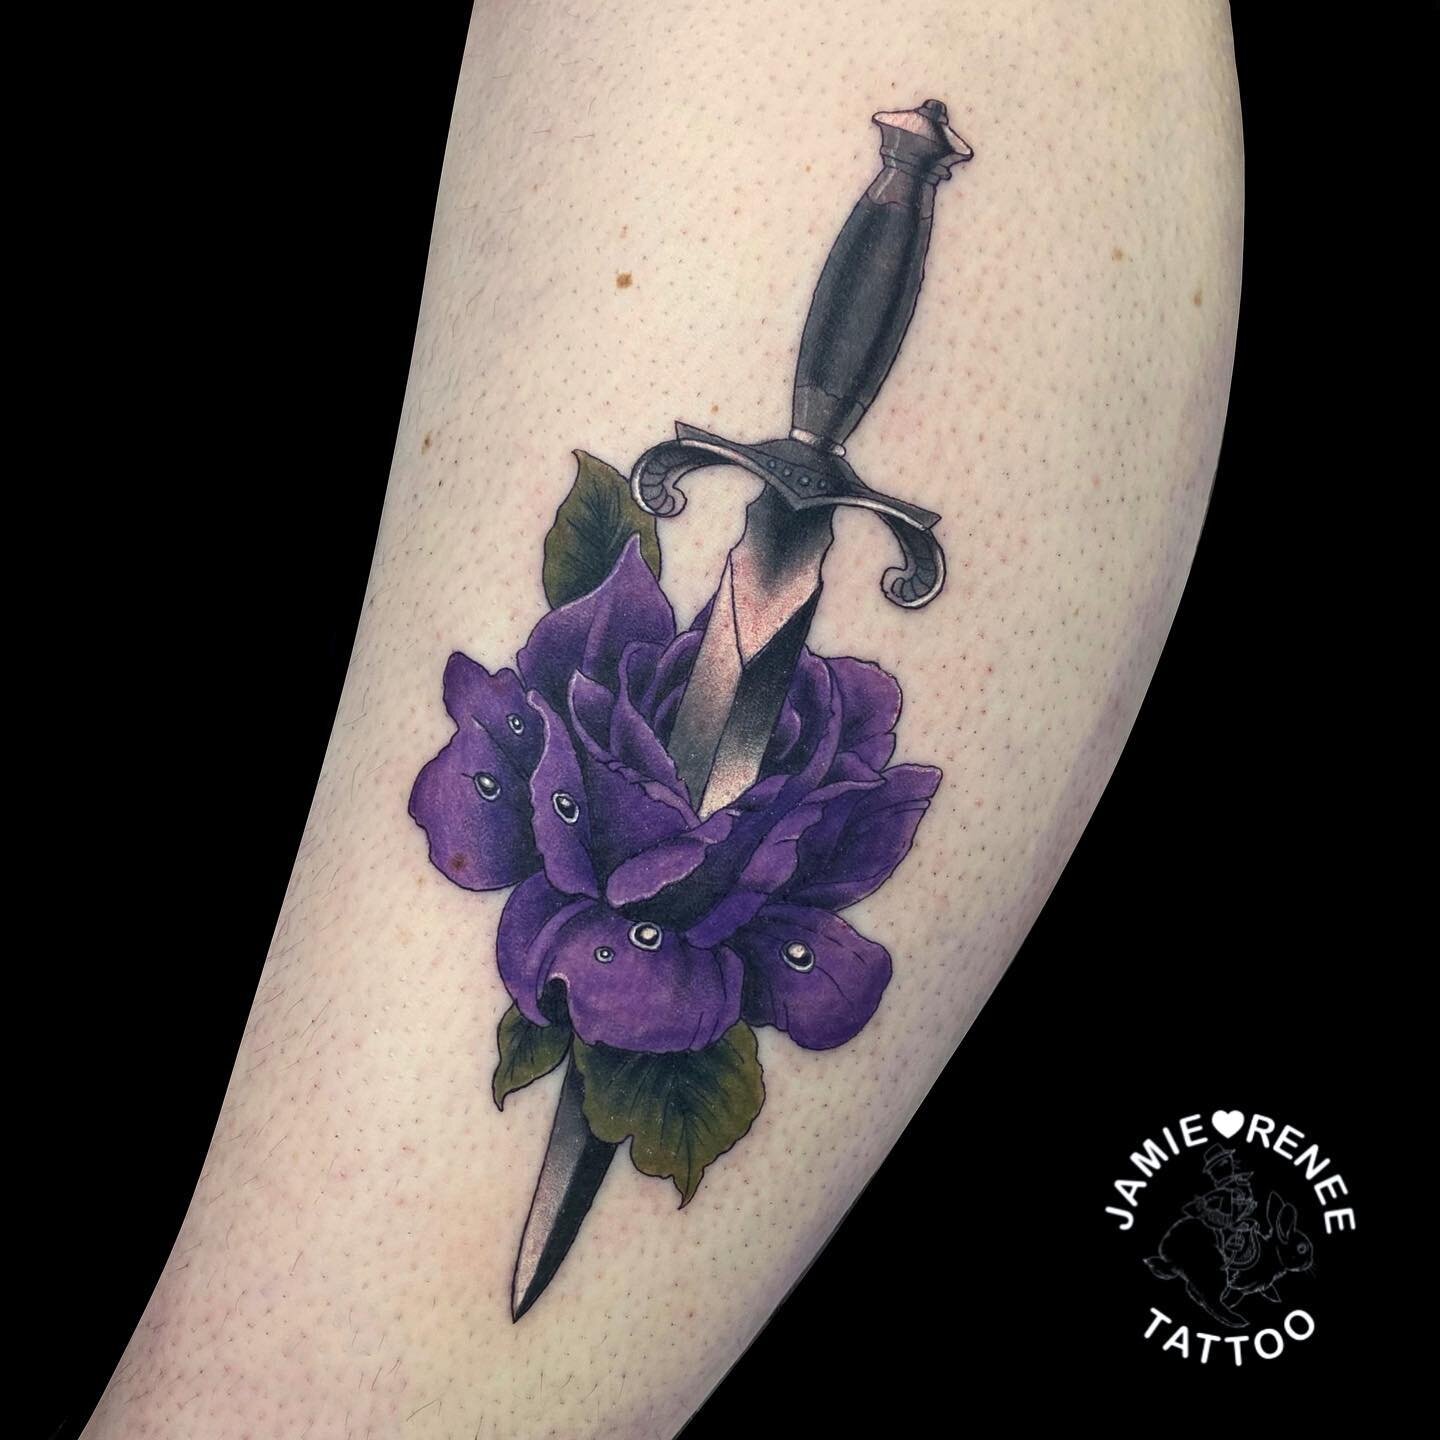 🌹Dagger &amp; Rose for Cailyn!🌹 Thank you so much for snapping up a last minute spot and grabbing this fun one from my Inked &amp; Empowered flash. 💜 @stencil.jam @kwadron @rawpigments @drmorsetattoo #tattoo #tattooartist #femaletattooartist #lady